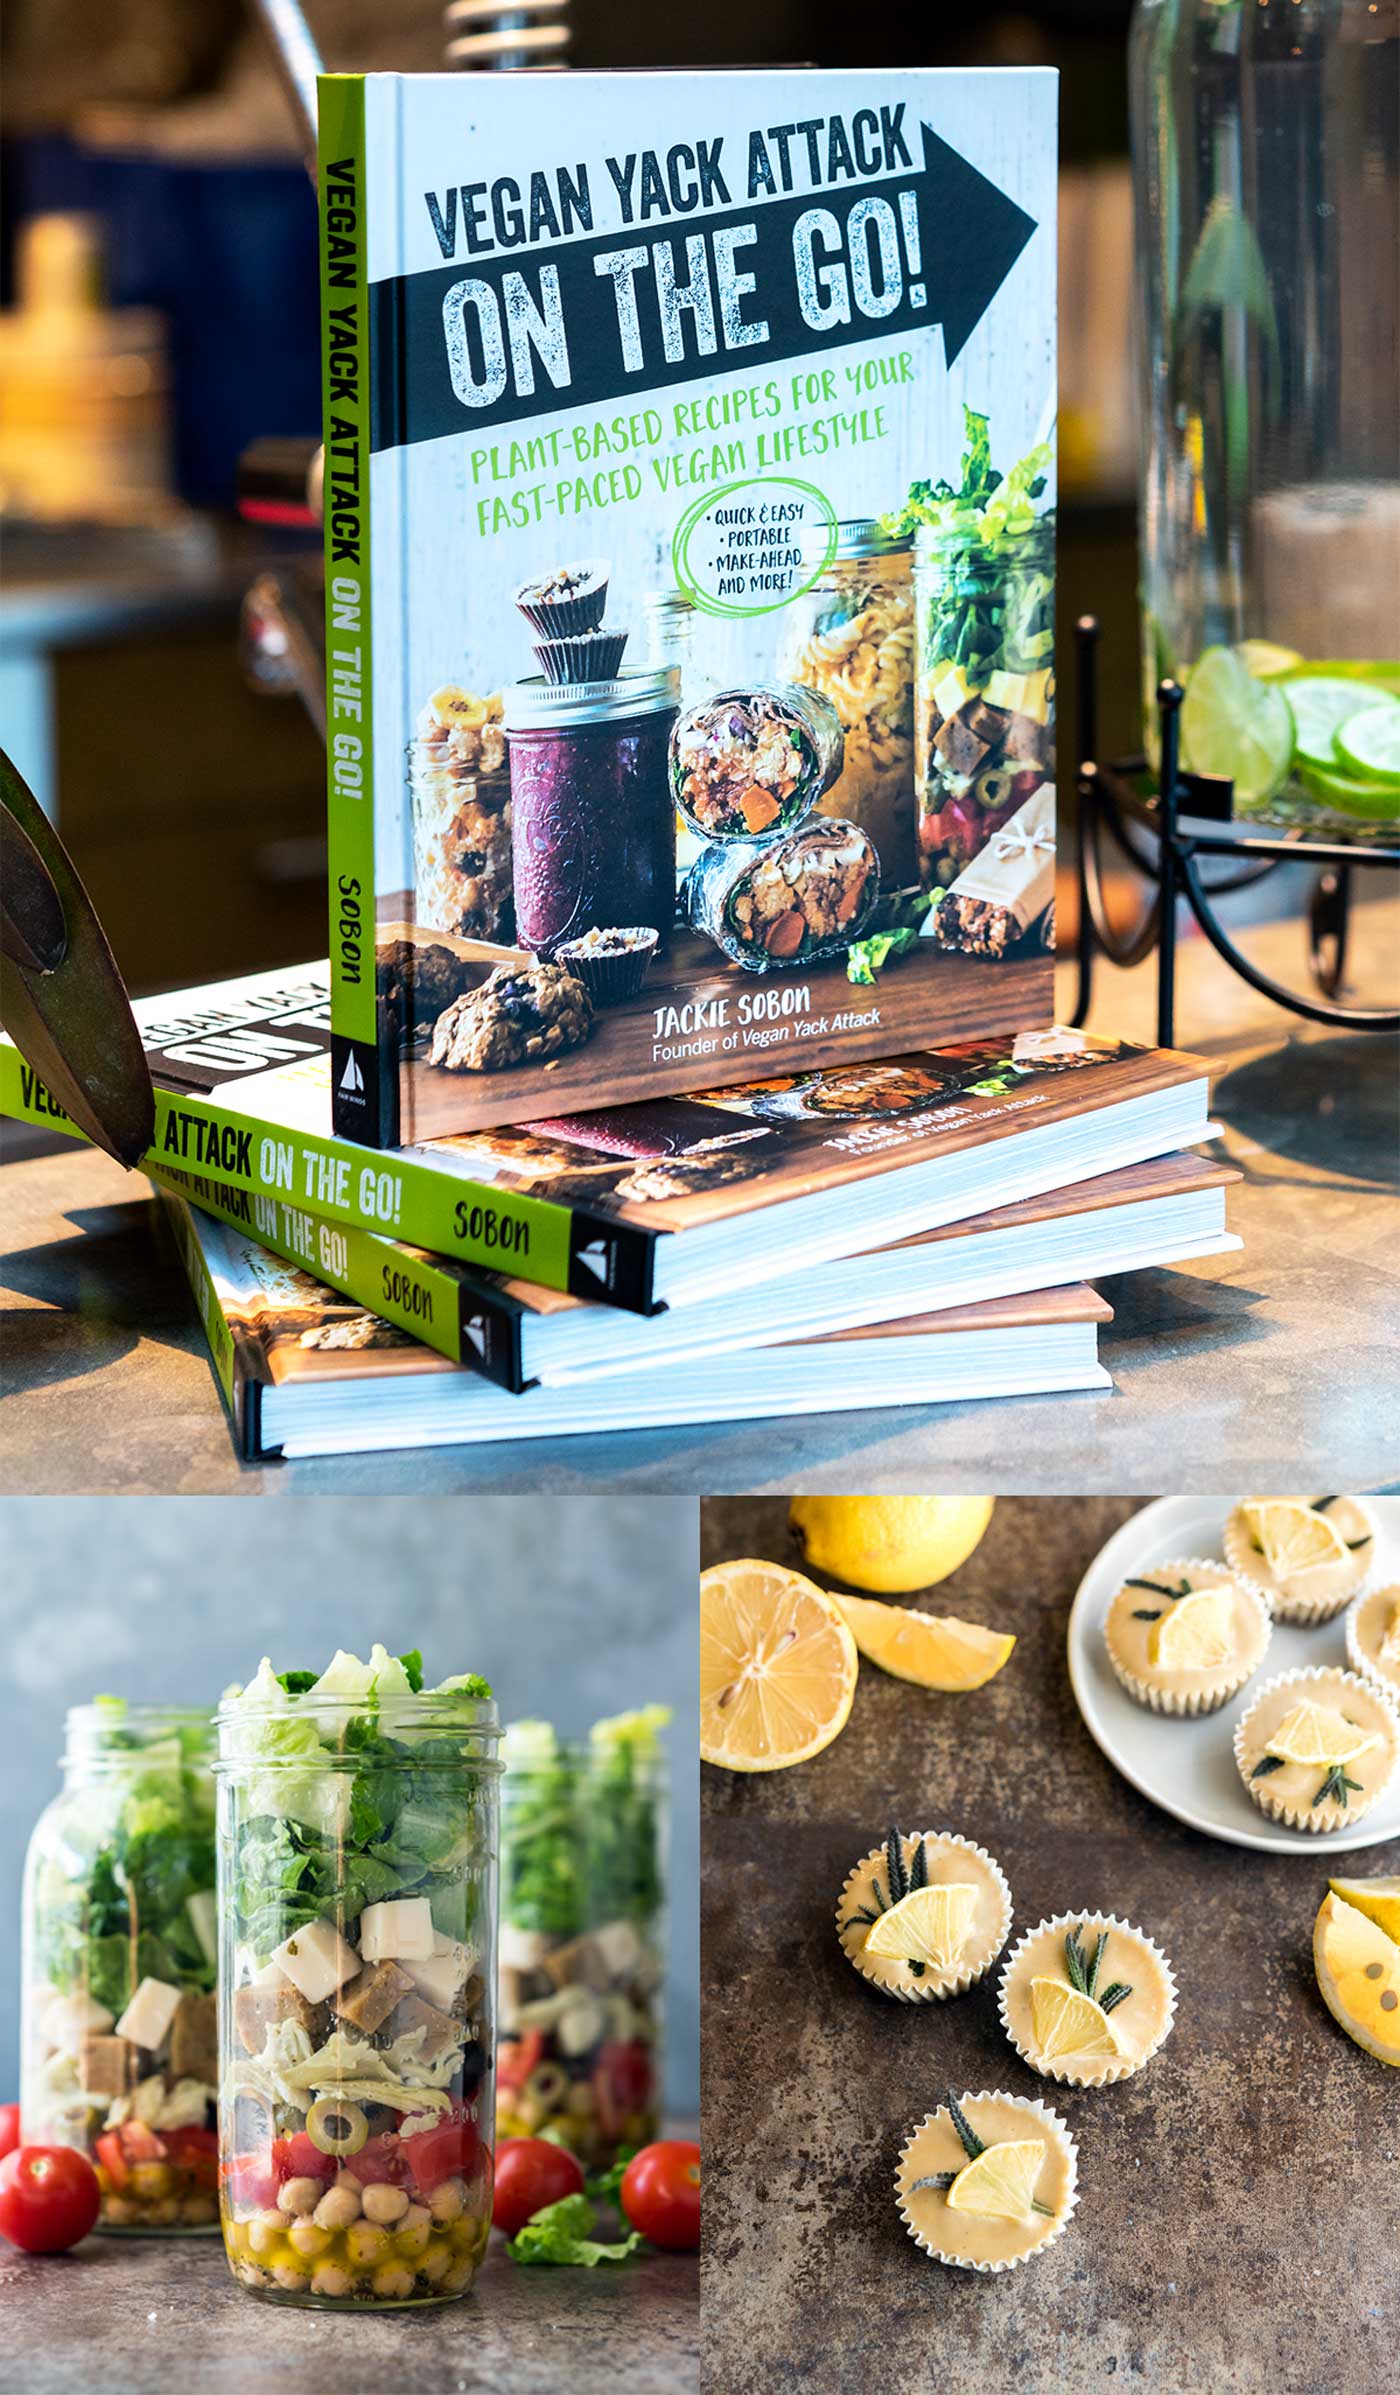 It's here! It's here! The release date of my second cookbook, Vegan Yack Attack On the Go! Quick recipes, make-ahead recipes, lunch, and recipes for on the move; this book has it all.